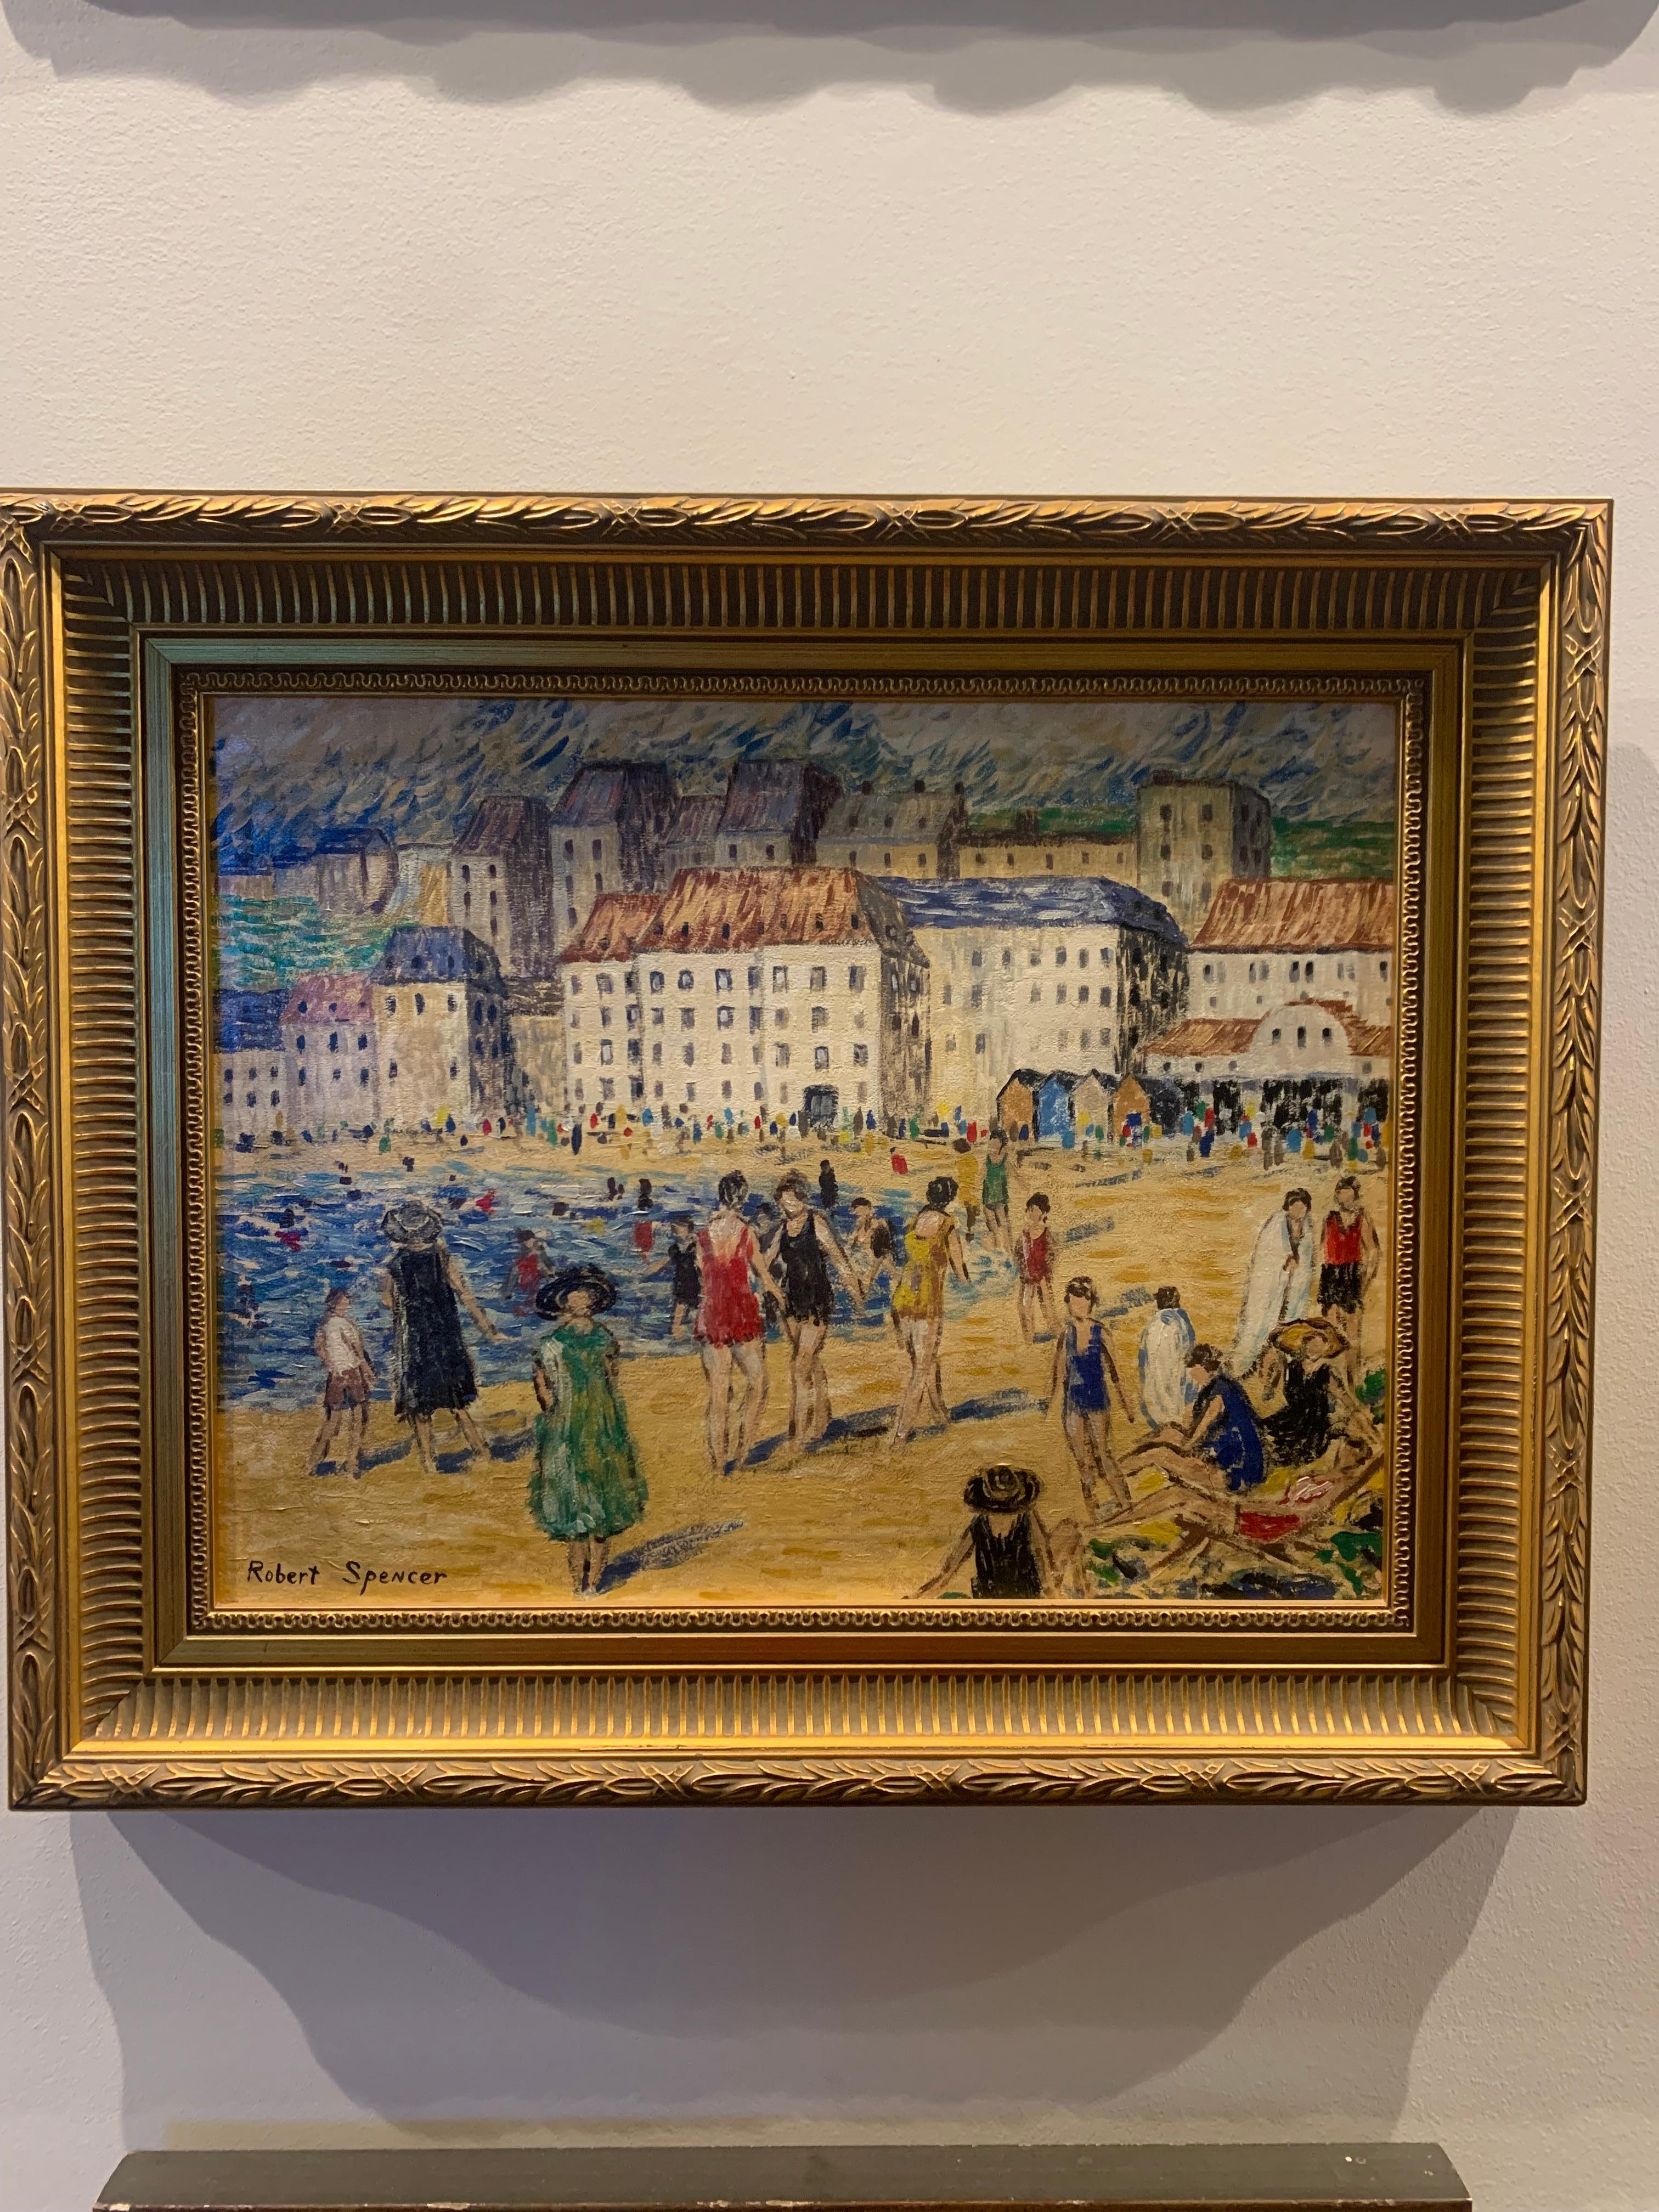 Robert Spencer 1879-1931, At the beach oil on canvas.

Description
signed Robert Spencer, l.l. oil on canvas

Dimensions
measurements 14 by 18 in. alternate measurements 35.5 by 45.8 cm.

Provenance
Busick Family Collection, Atlanta,